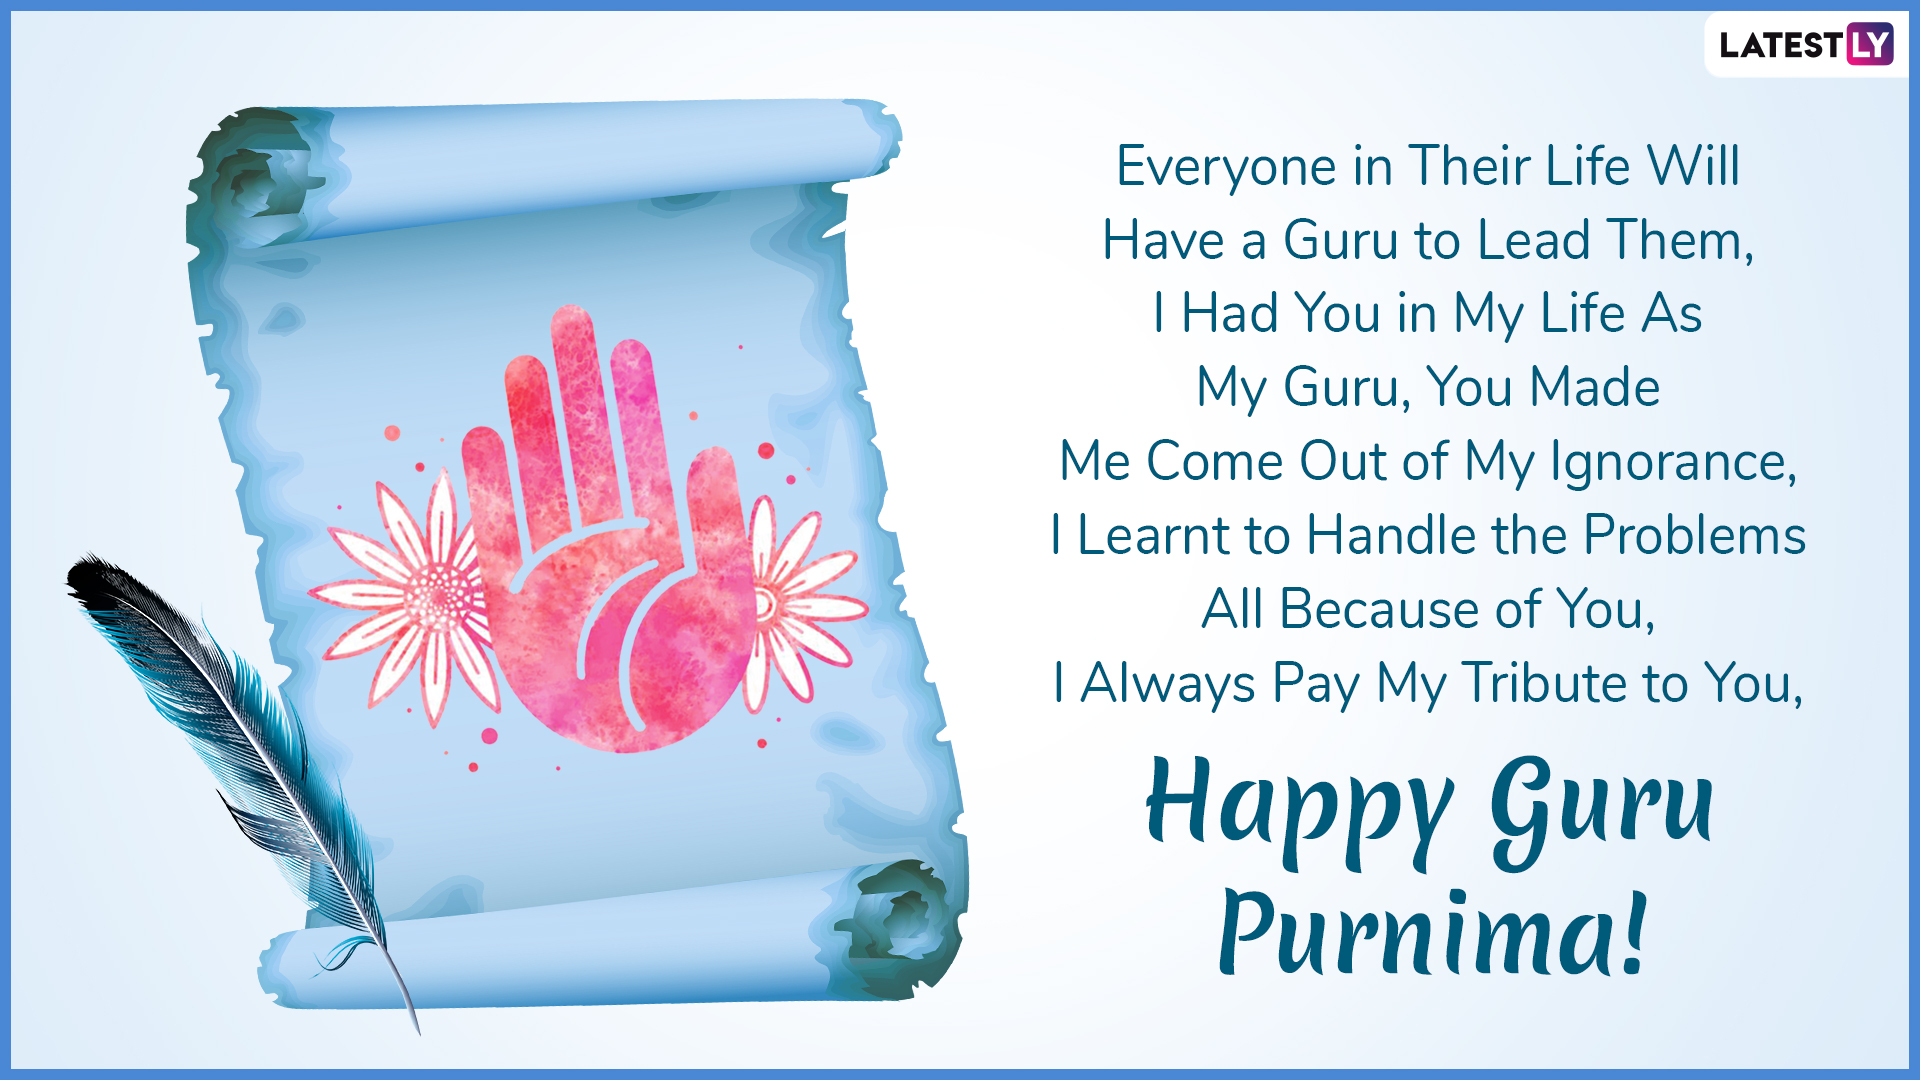 Guru Purnima 2019 Messages in Hindi: WhatsApp Stickers, Quotes, GIF Image  Greetings, SMS and Facebook Photos to Wish Happy Guru Purnima | 🙏🏻  LatestLY